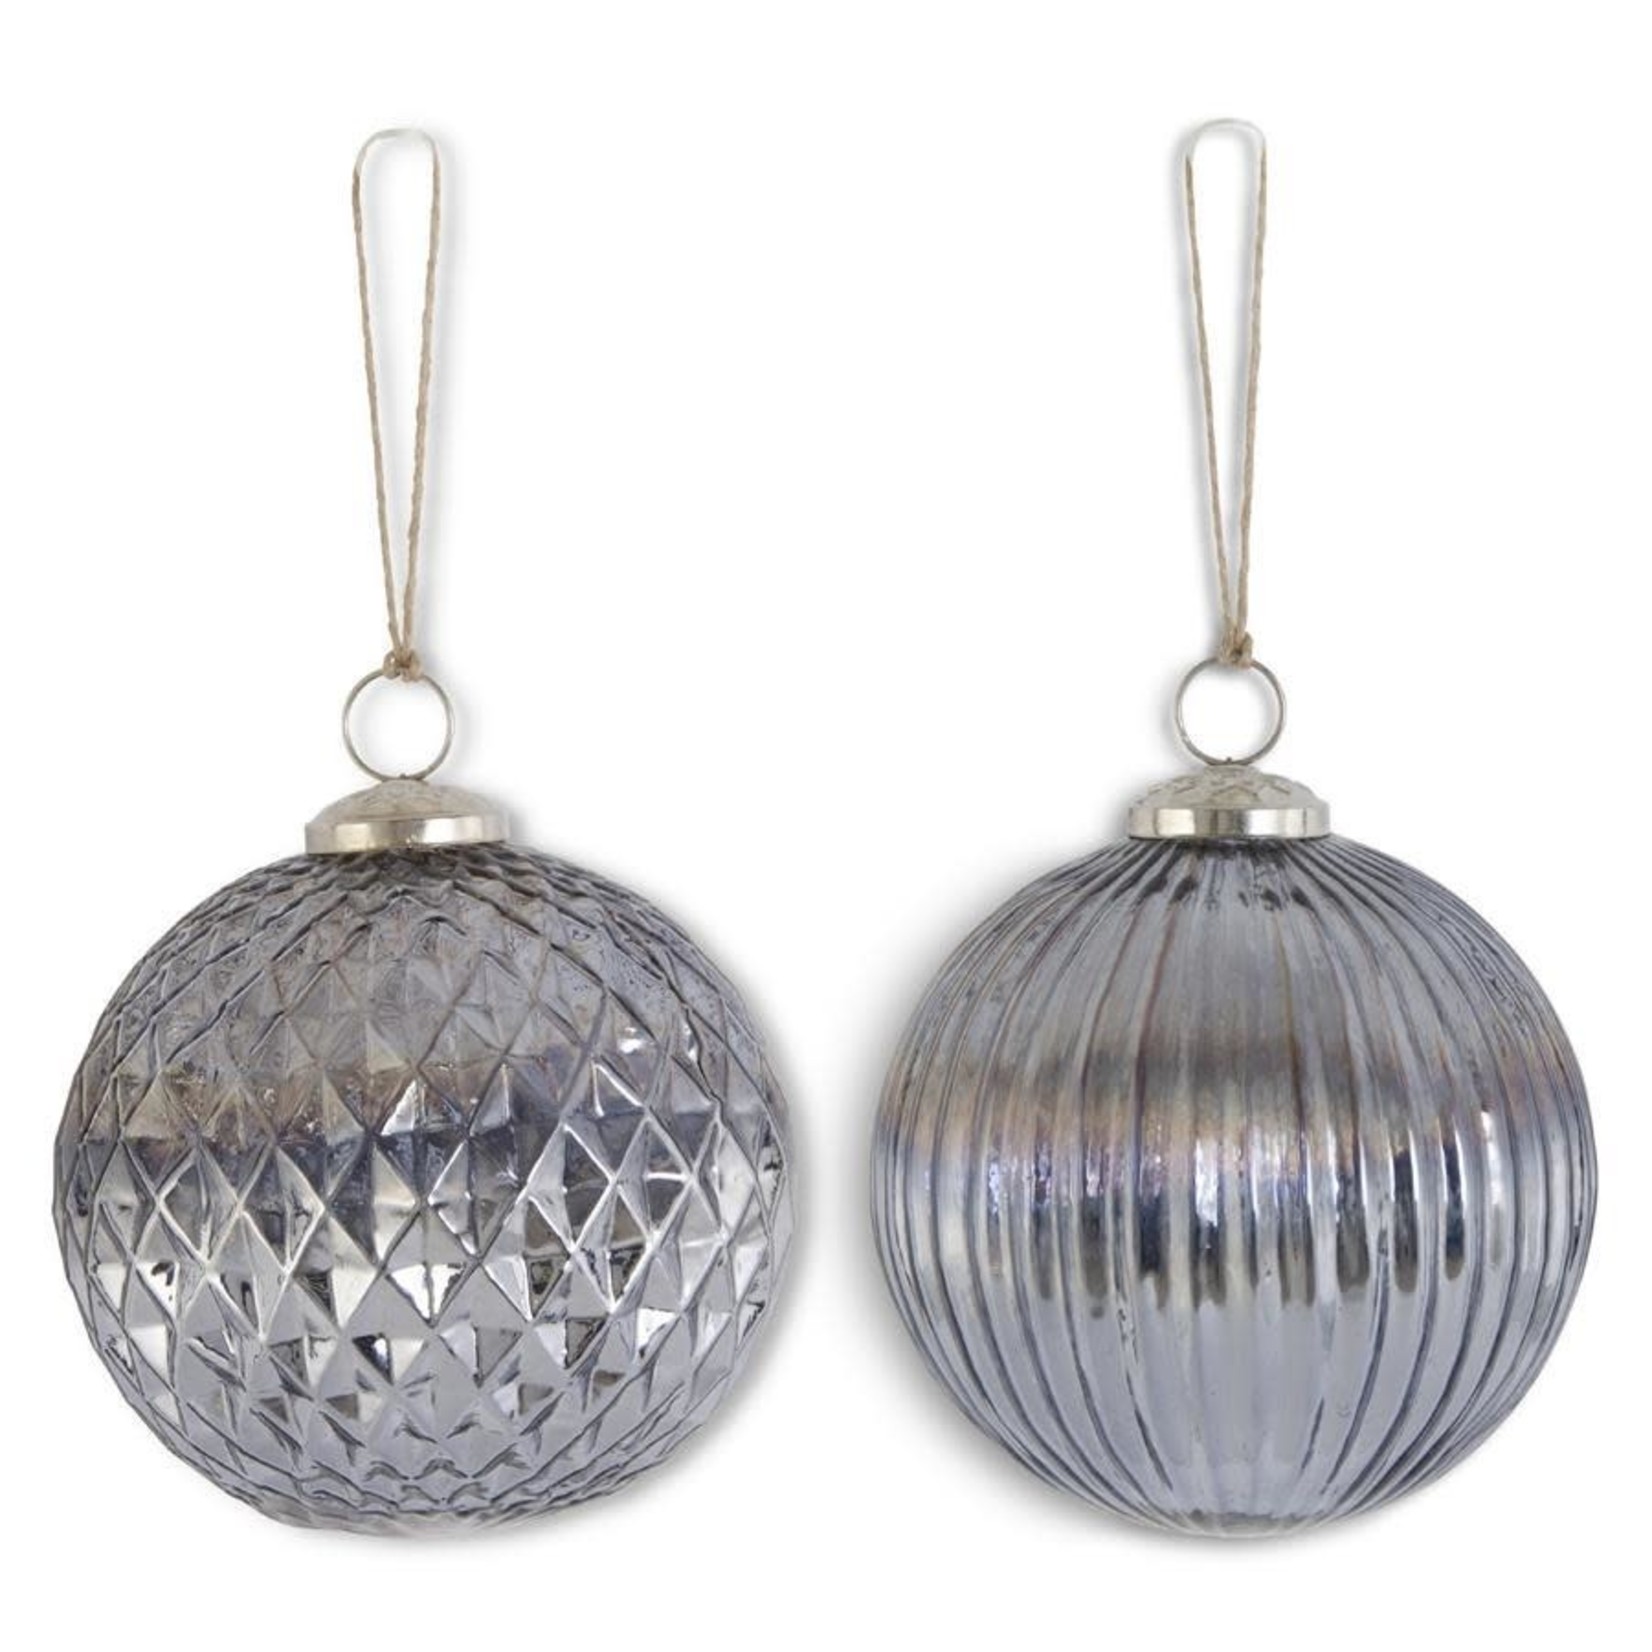 ASSORTED 5 INCH BLUE GRAY MERCURY GLASS ORNAMENTS (2 STYLES)